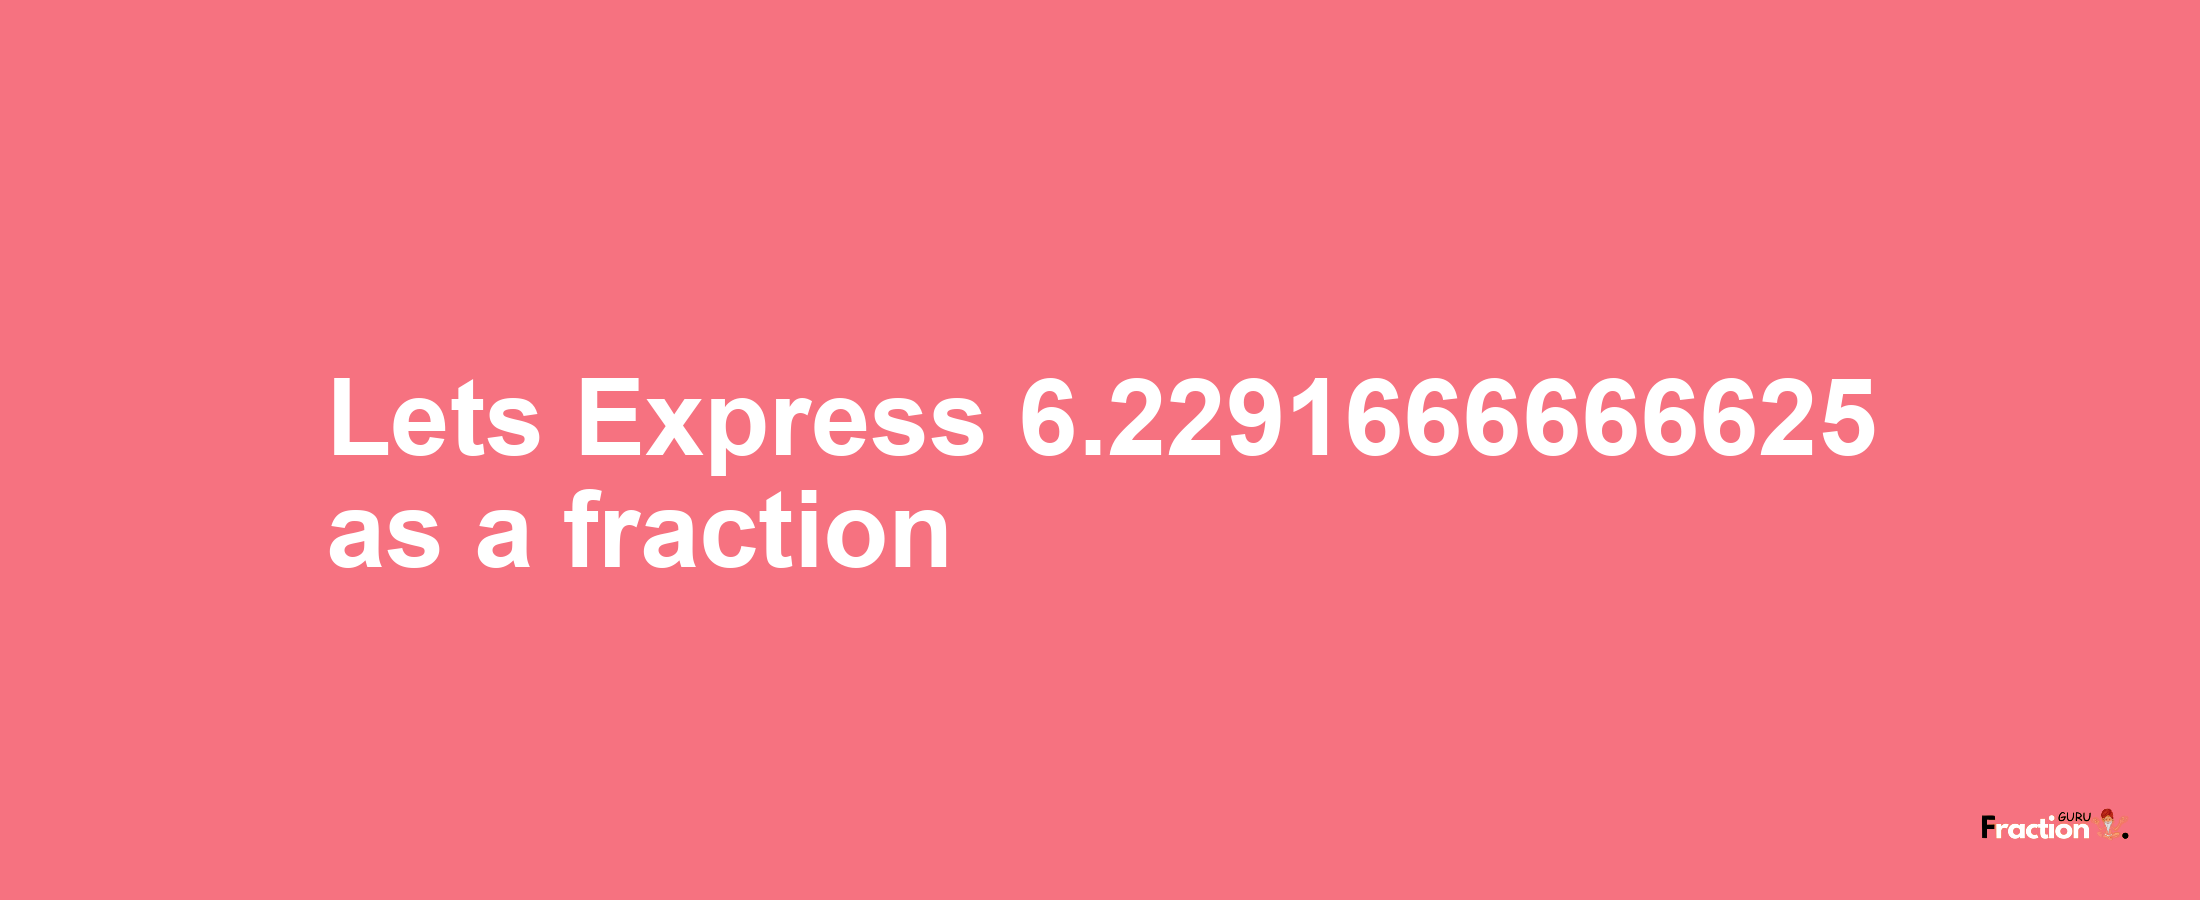 Lets Express 6.2291666666625 as afraction